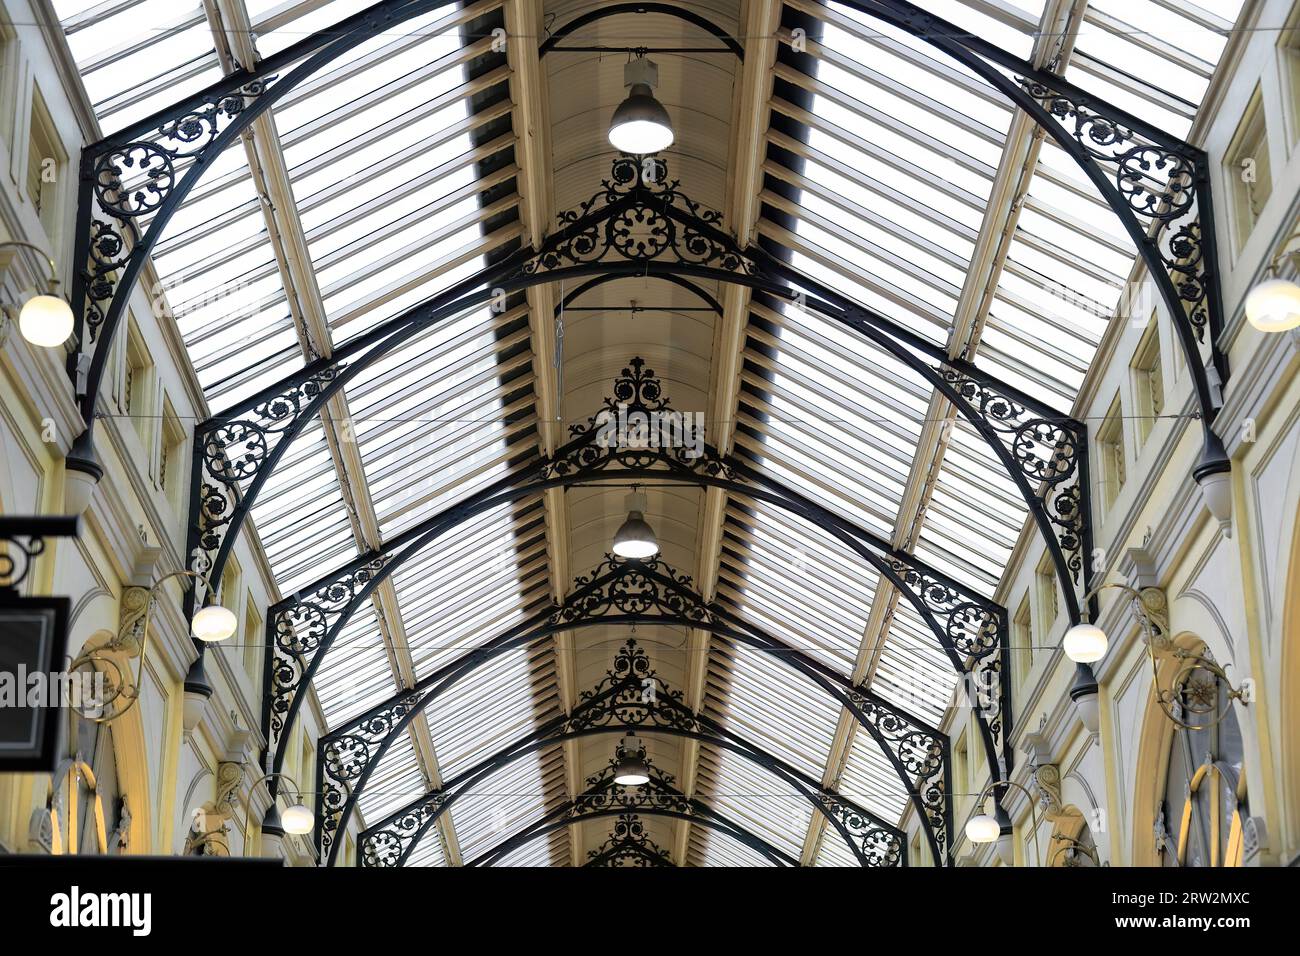 933 Glass roof on iron arches of the AD 1870 opened The Royal Arcade, Australia's oldest extant shopping arcade. Melbourne. Stock Photo